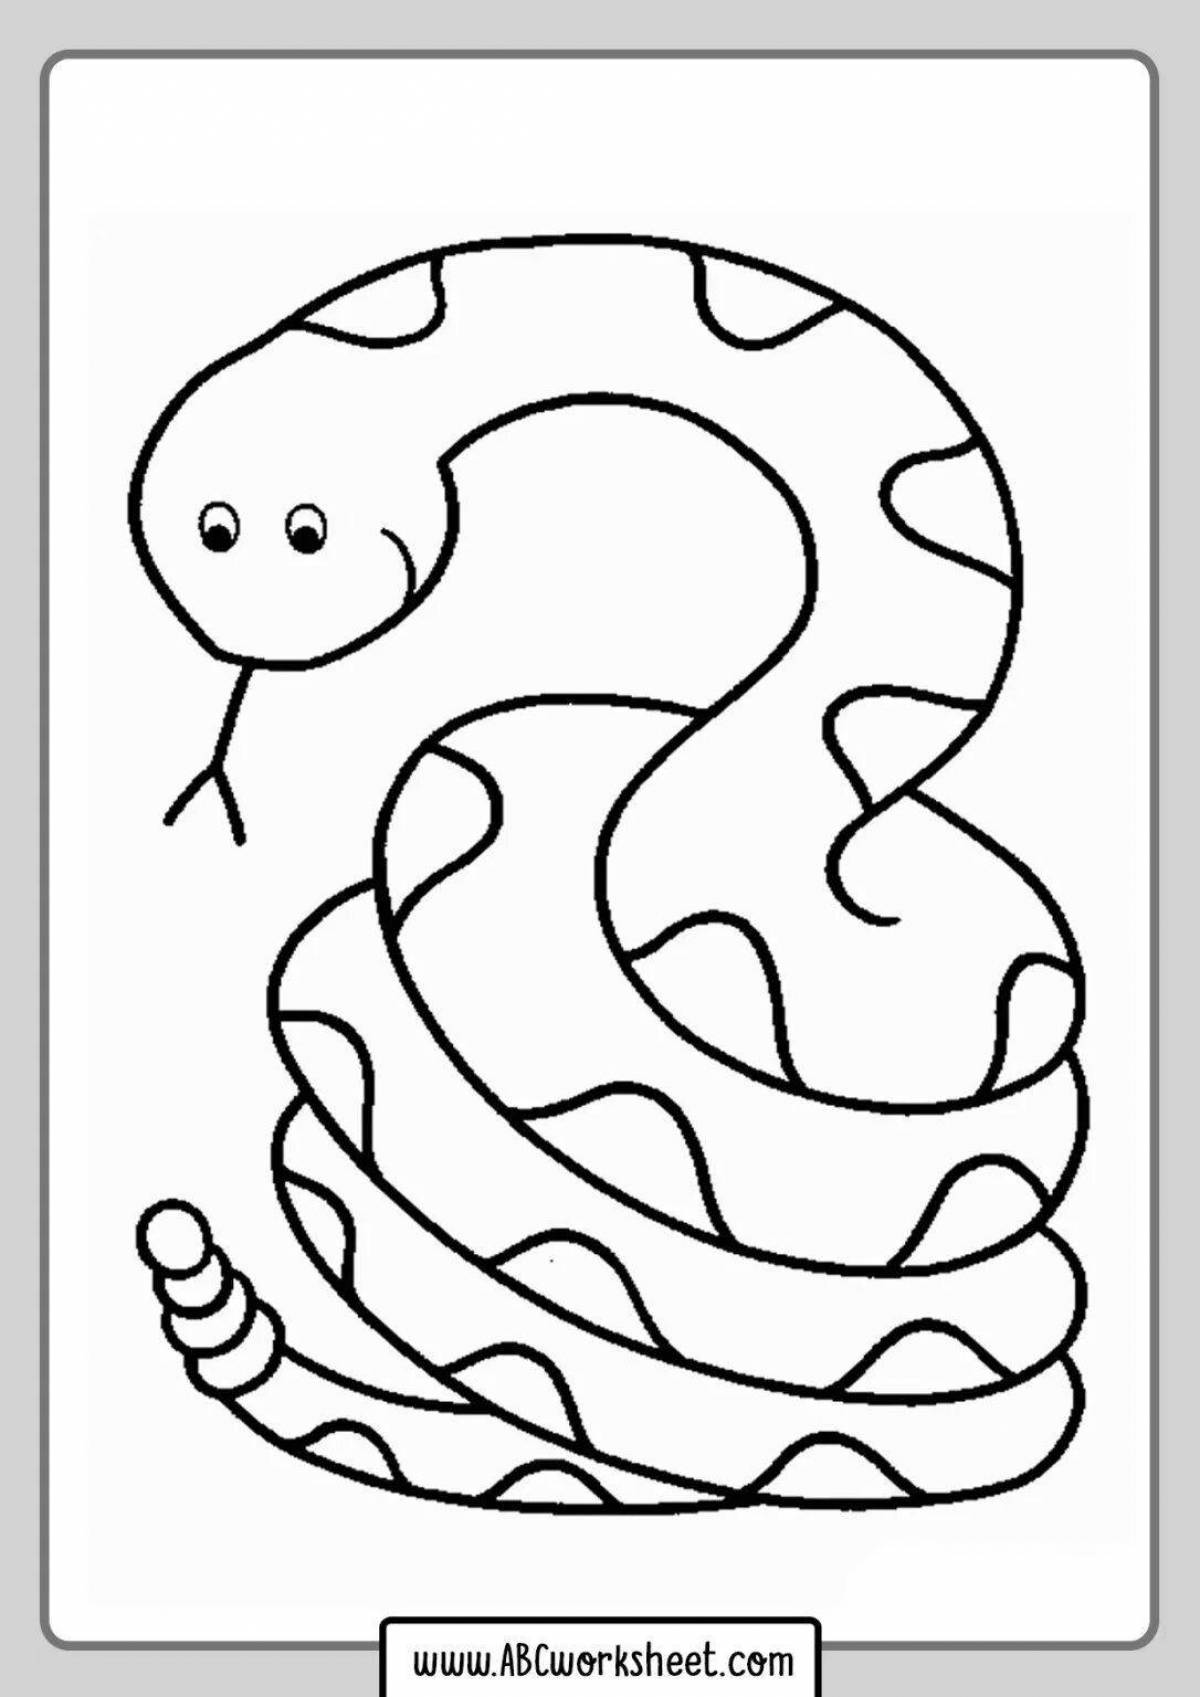 Bright snake coloring book for children 3-4 years old